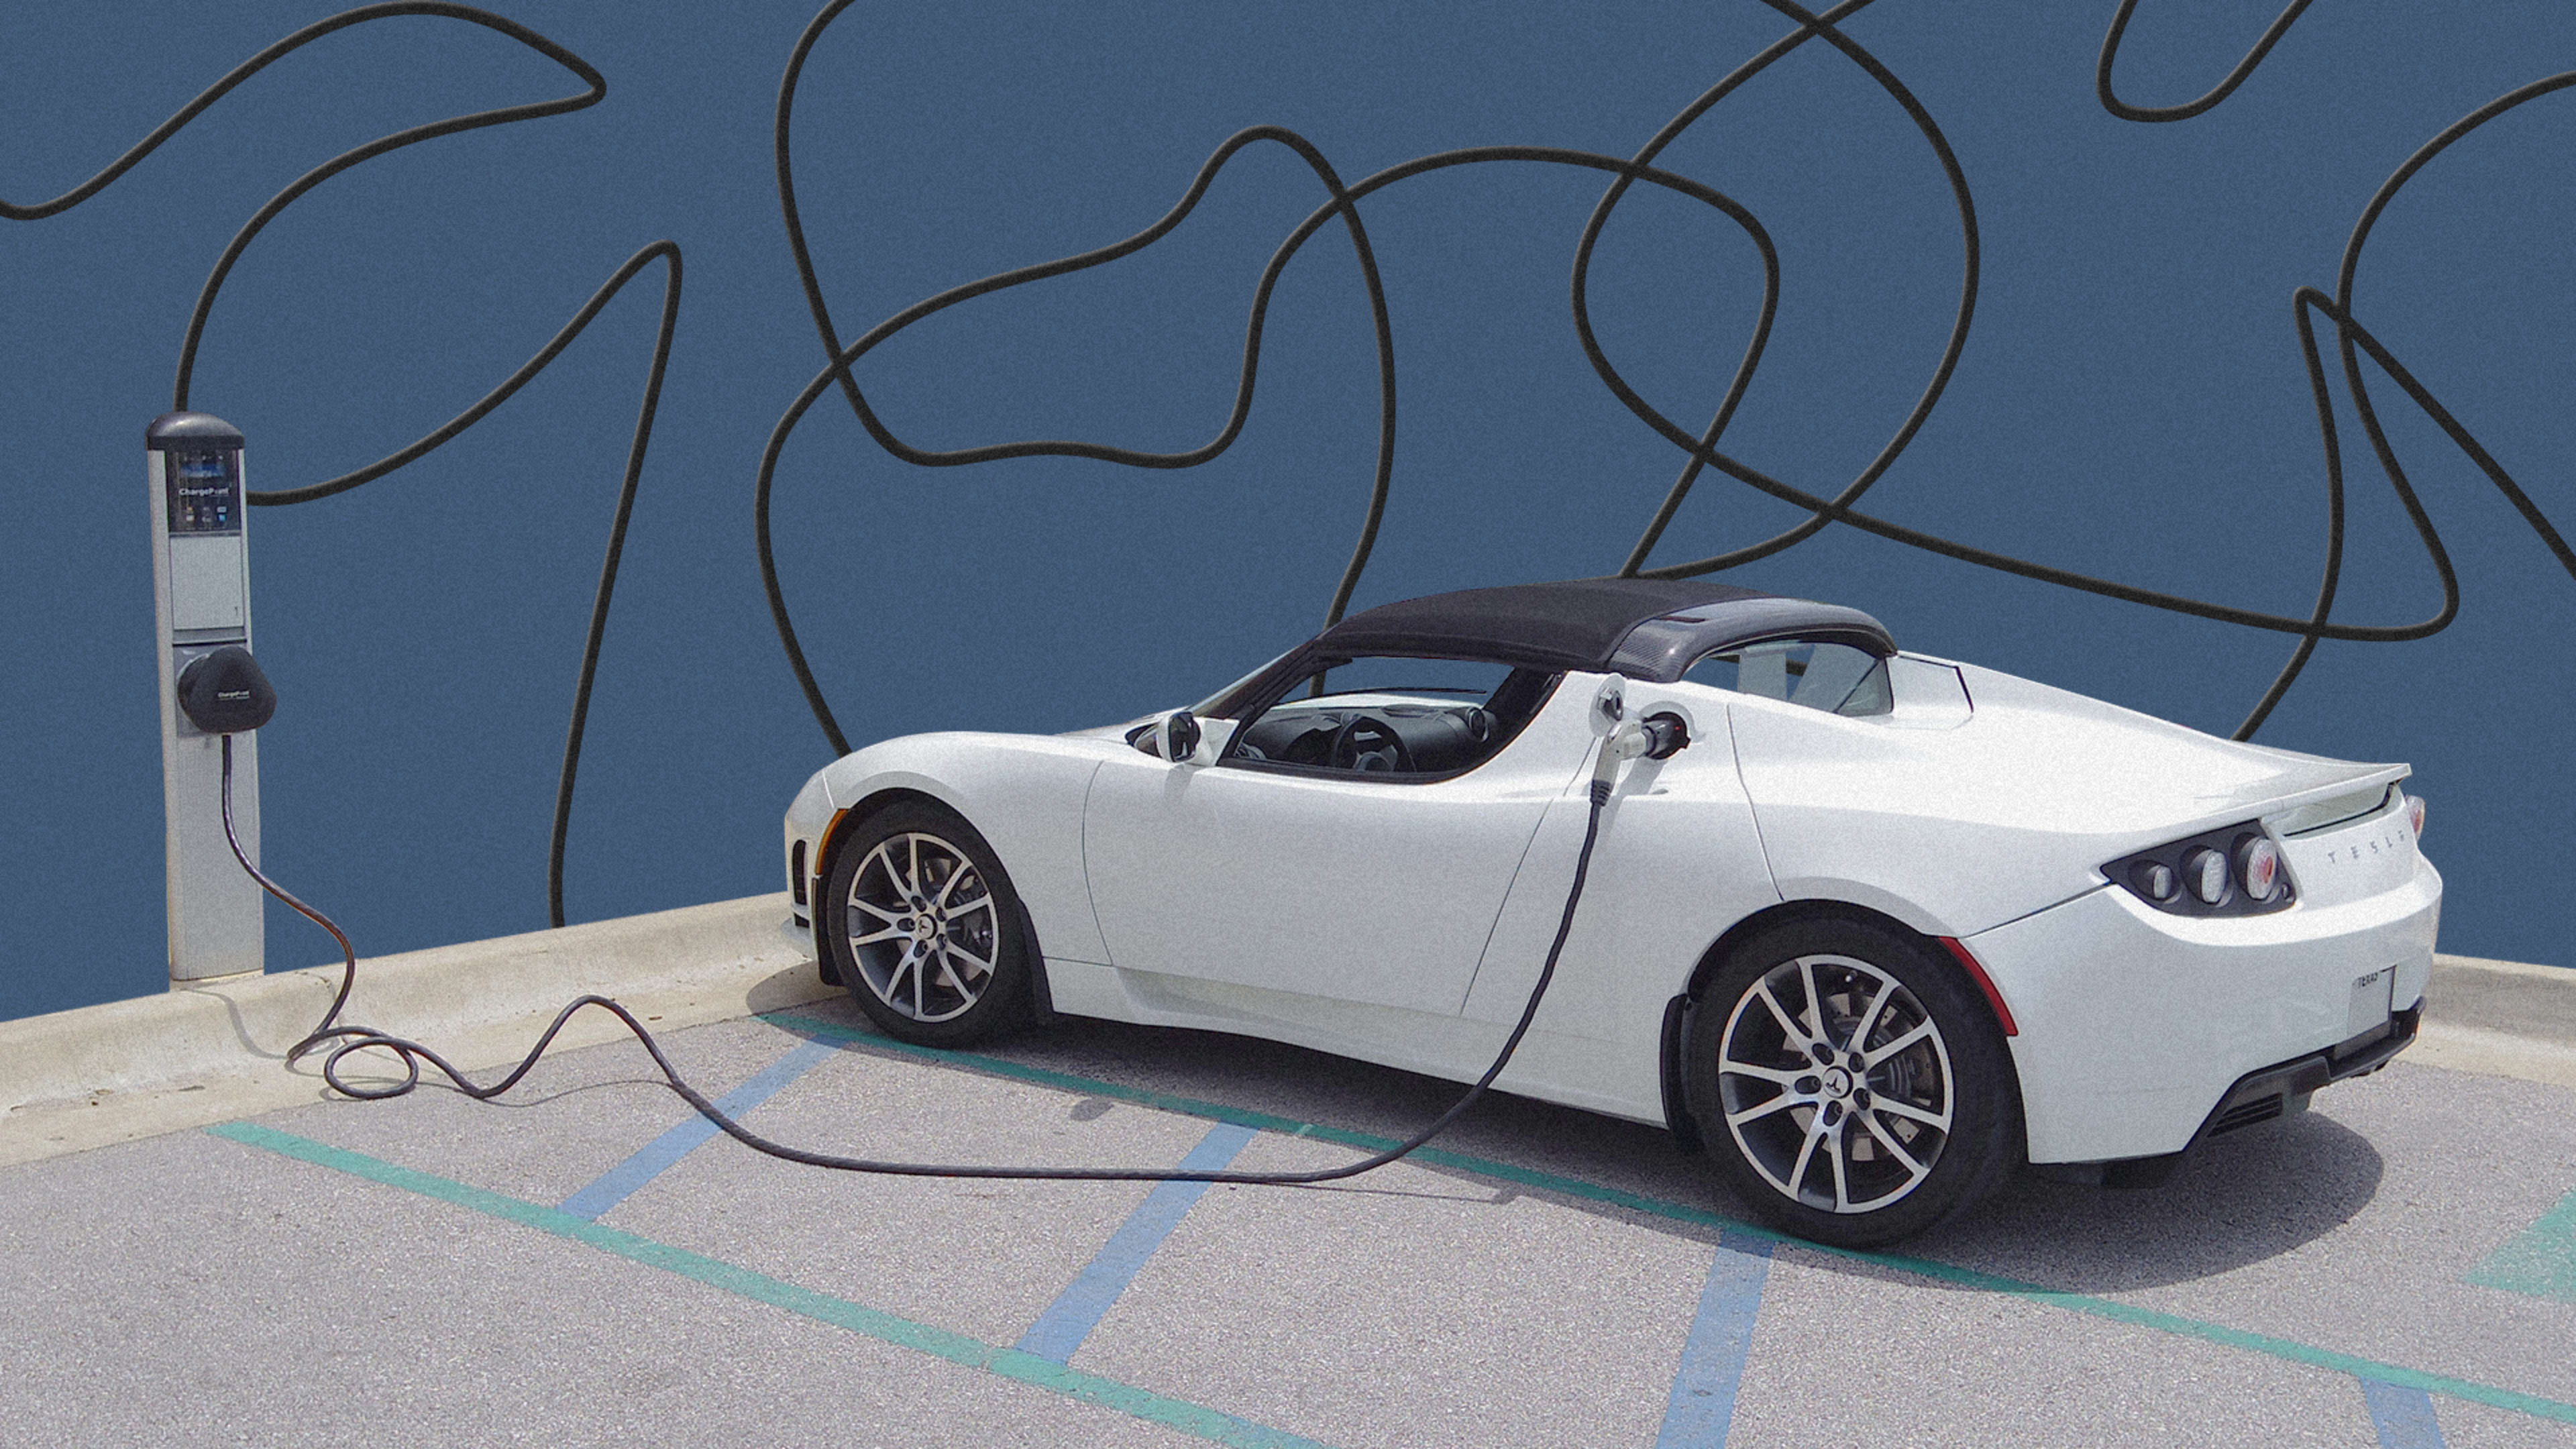 Everybody wants EV charging stations, but barely anyone is building them